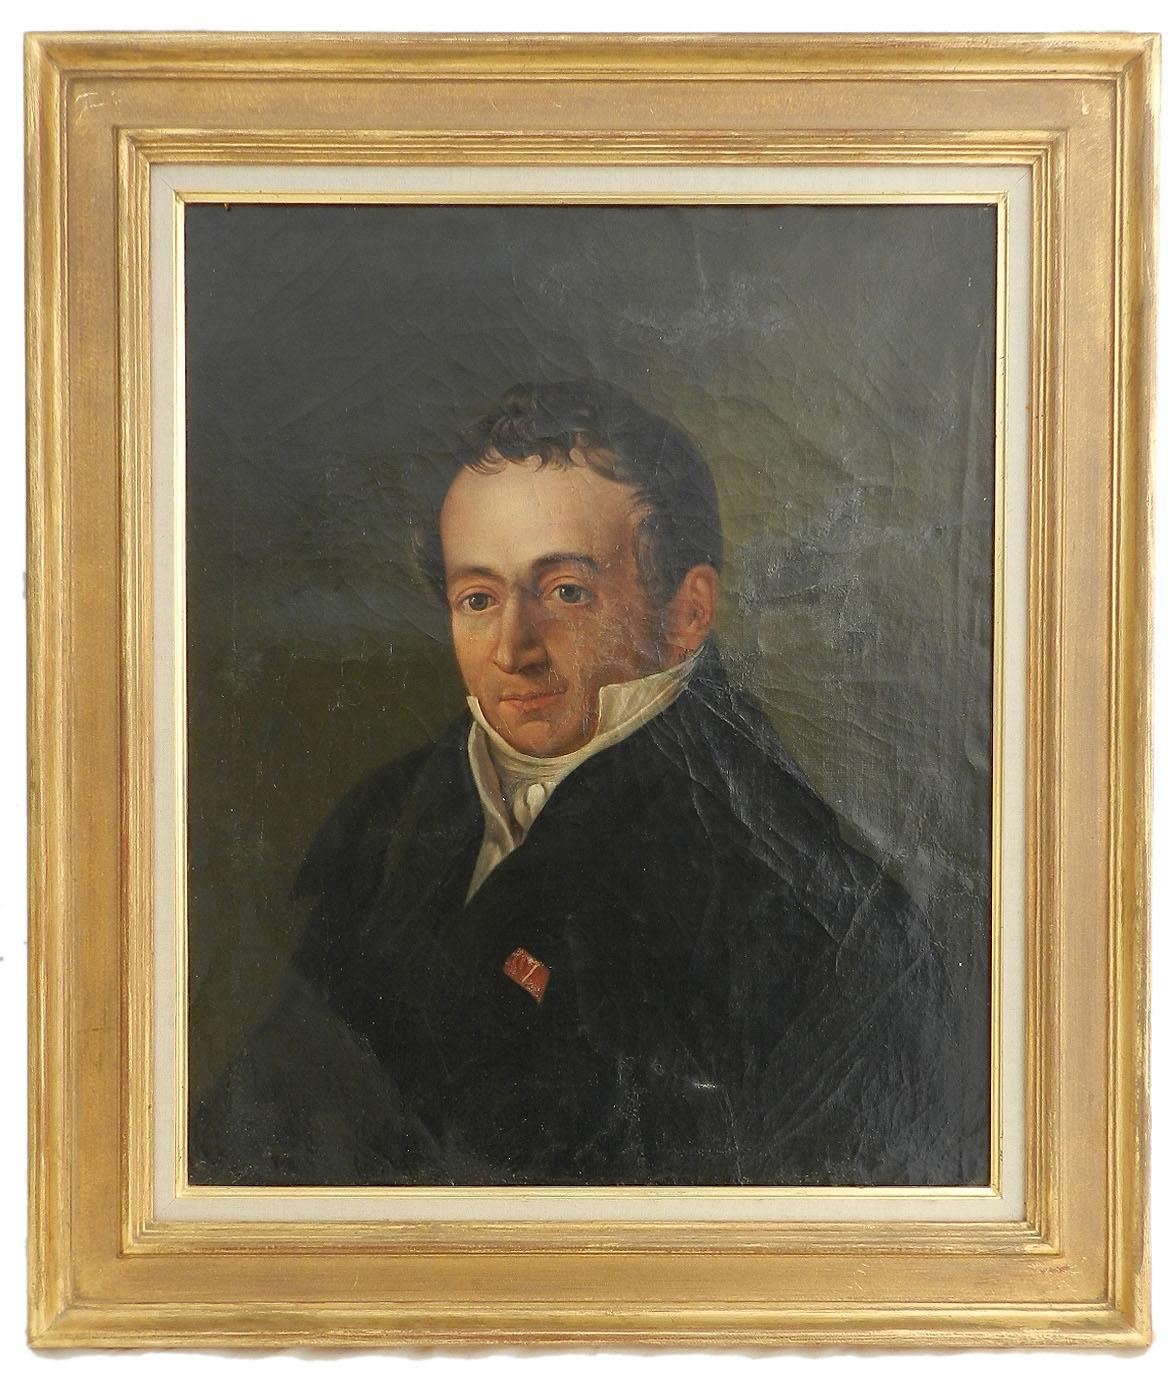 19th Century Portrait of a Gentleman French Oil on Canvas 
c1830-1850
Good antique condition this has been relined 
In a gold frame that is slightly later

